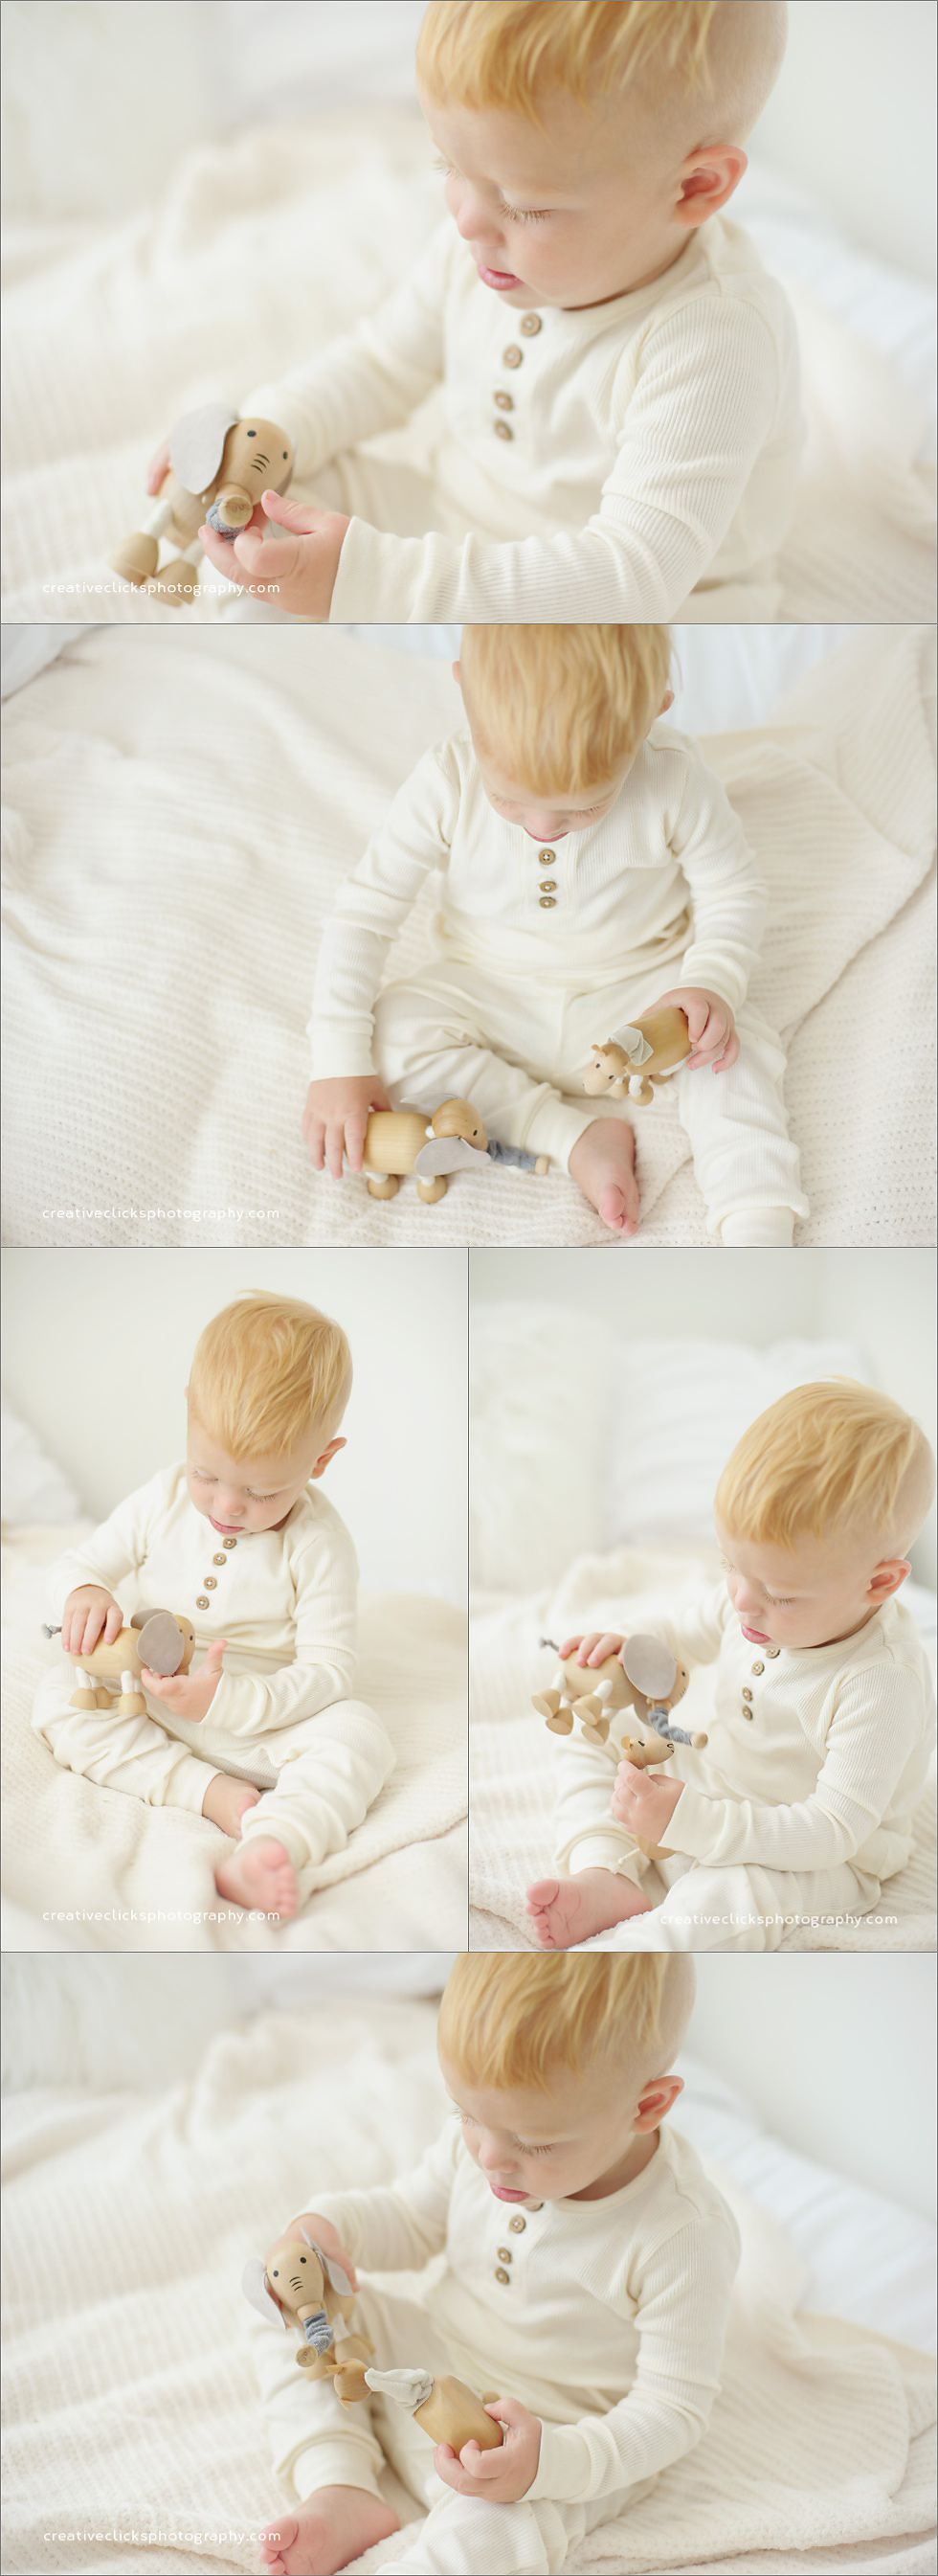 baby boy playing with wooden toys at portrait session